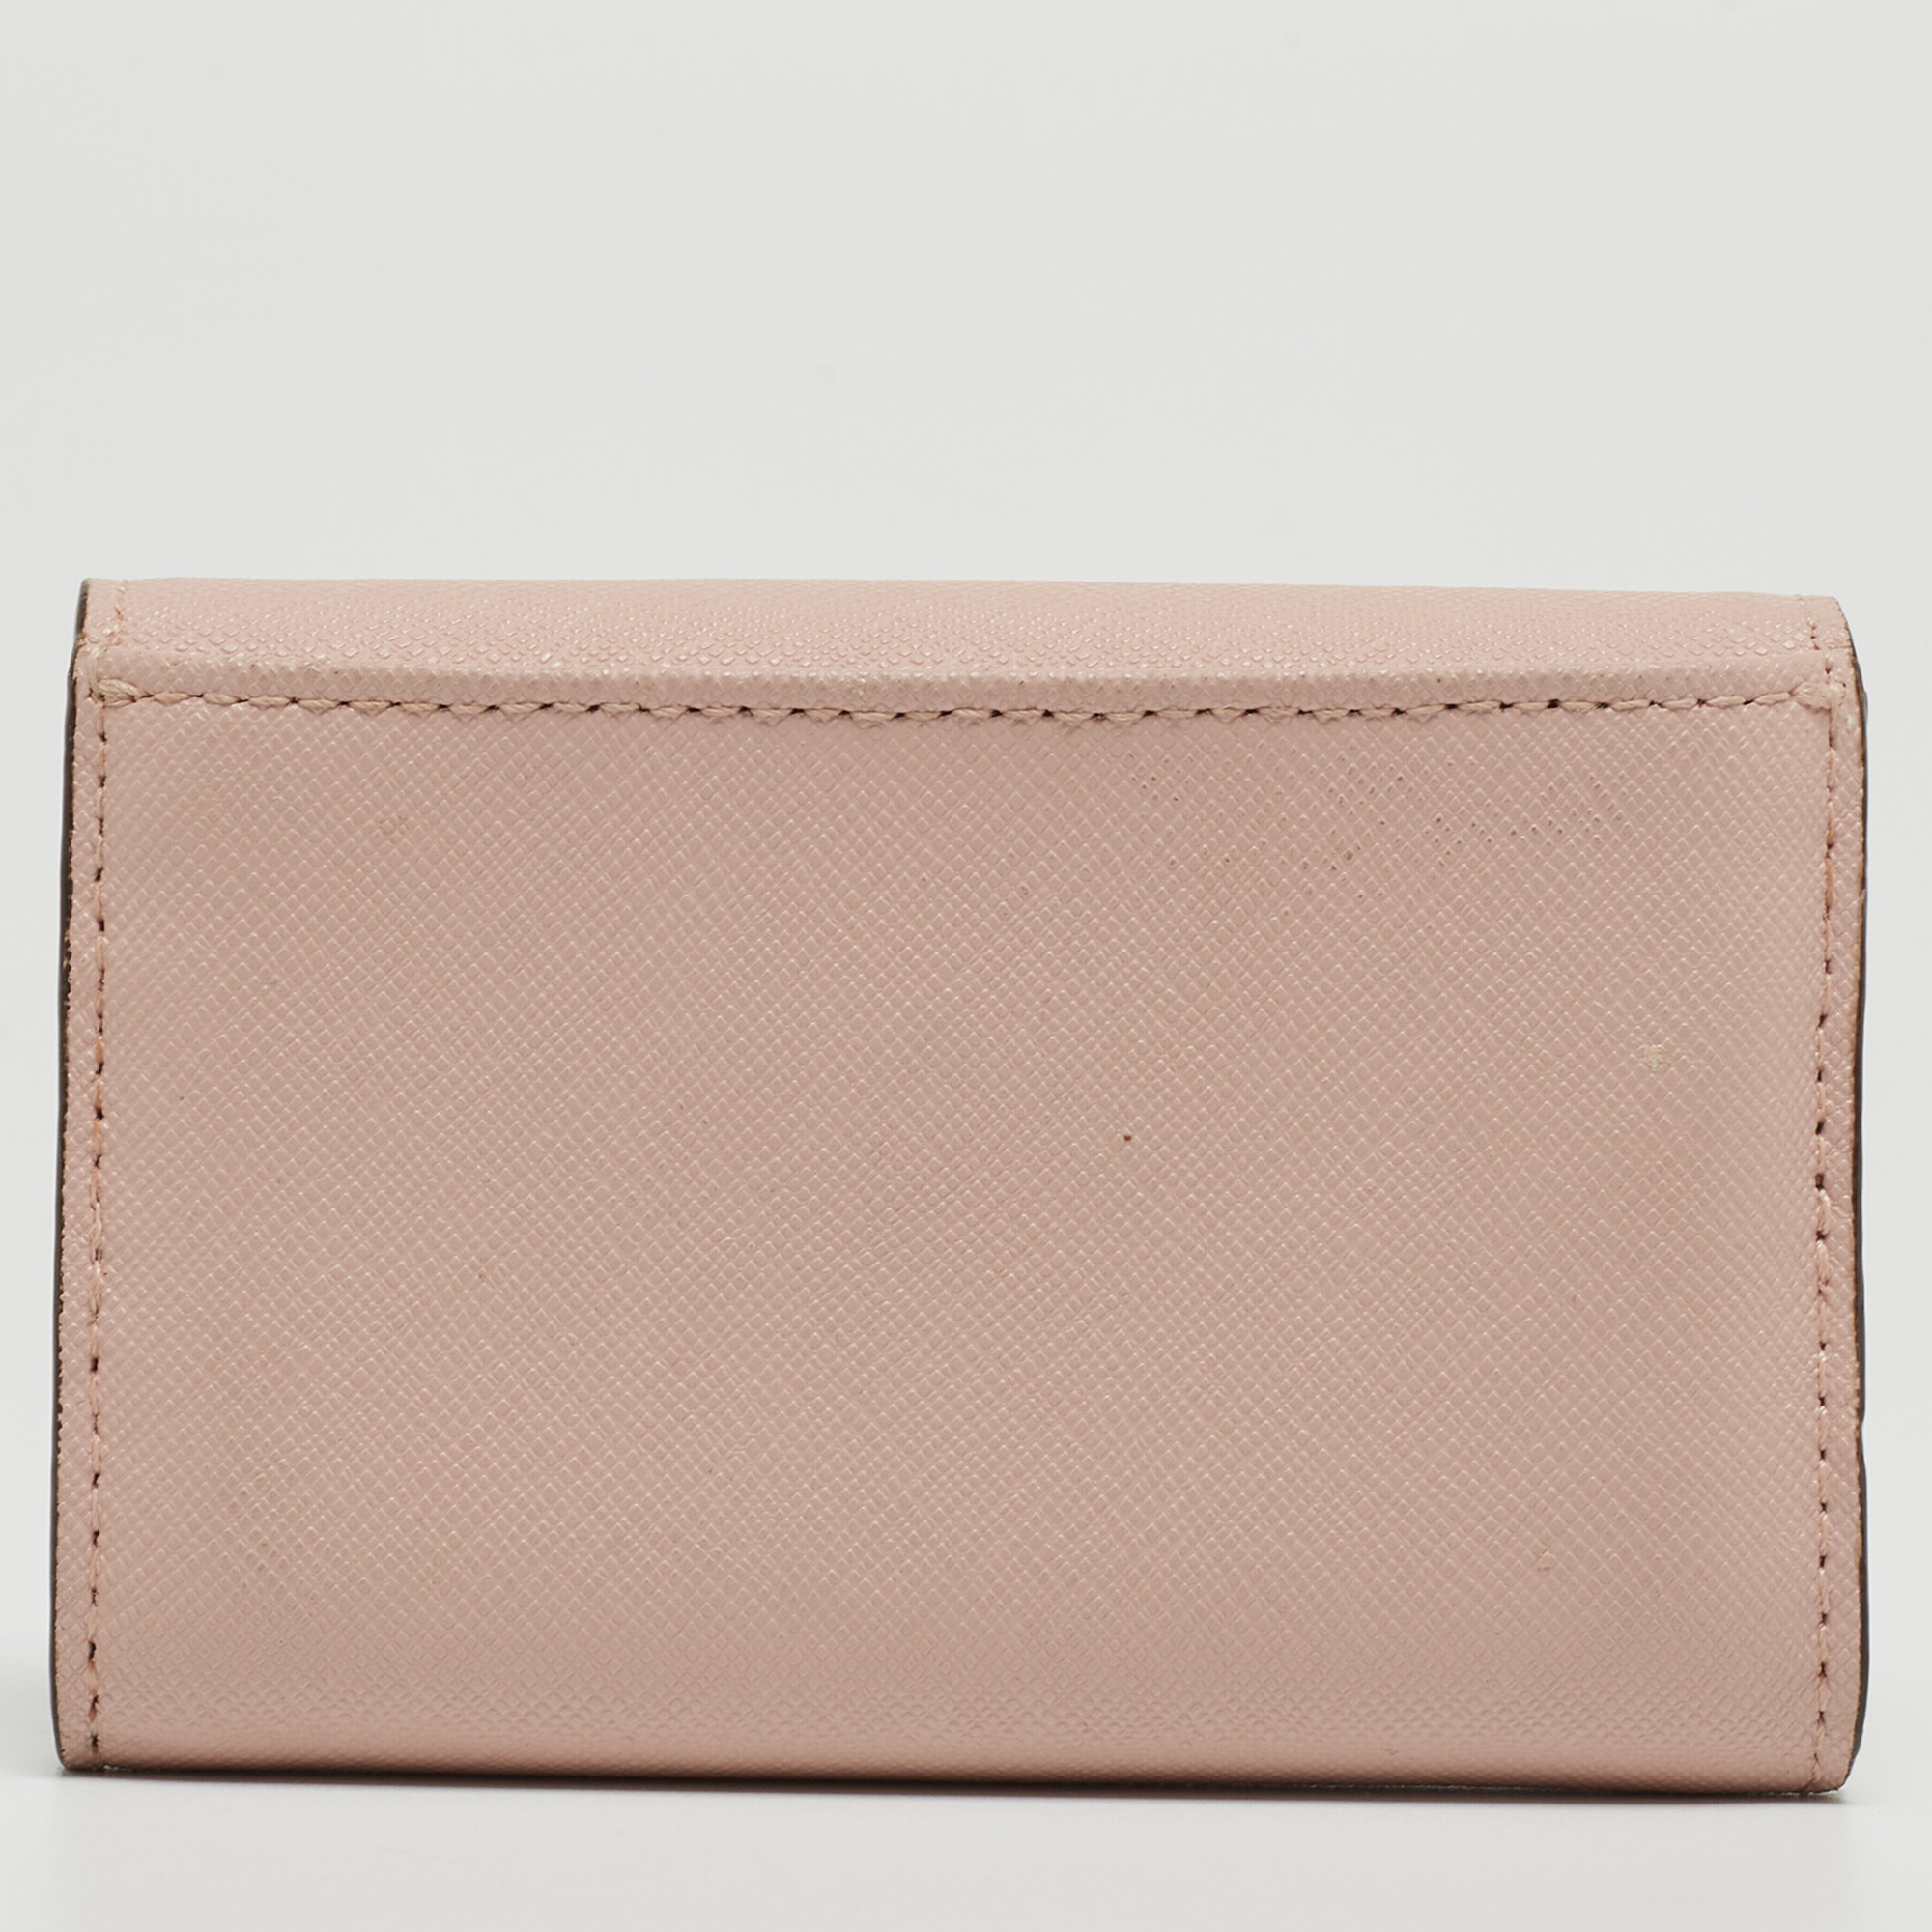 DKNY Pink Saffiano Leather Flap Compact Wallet